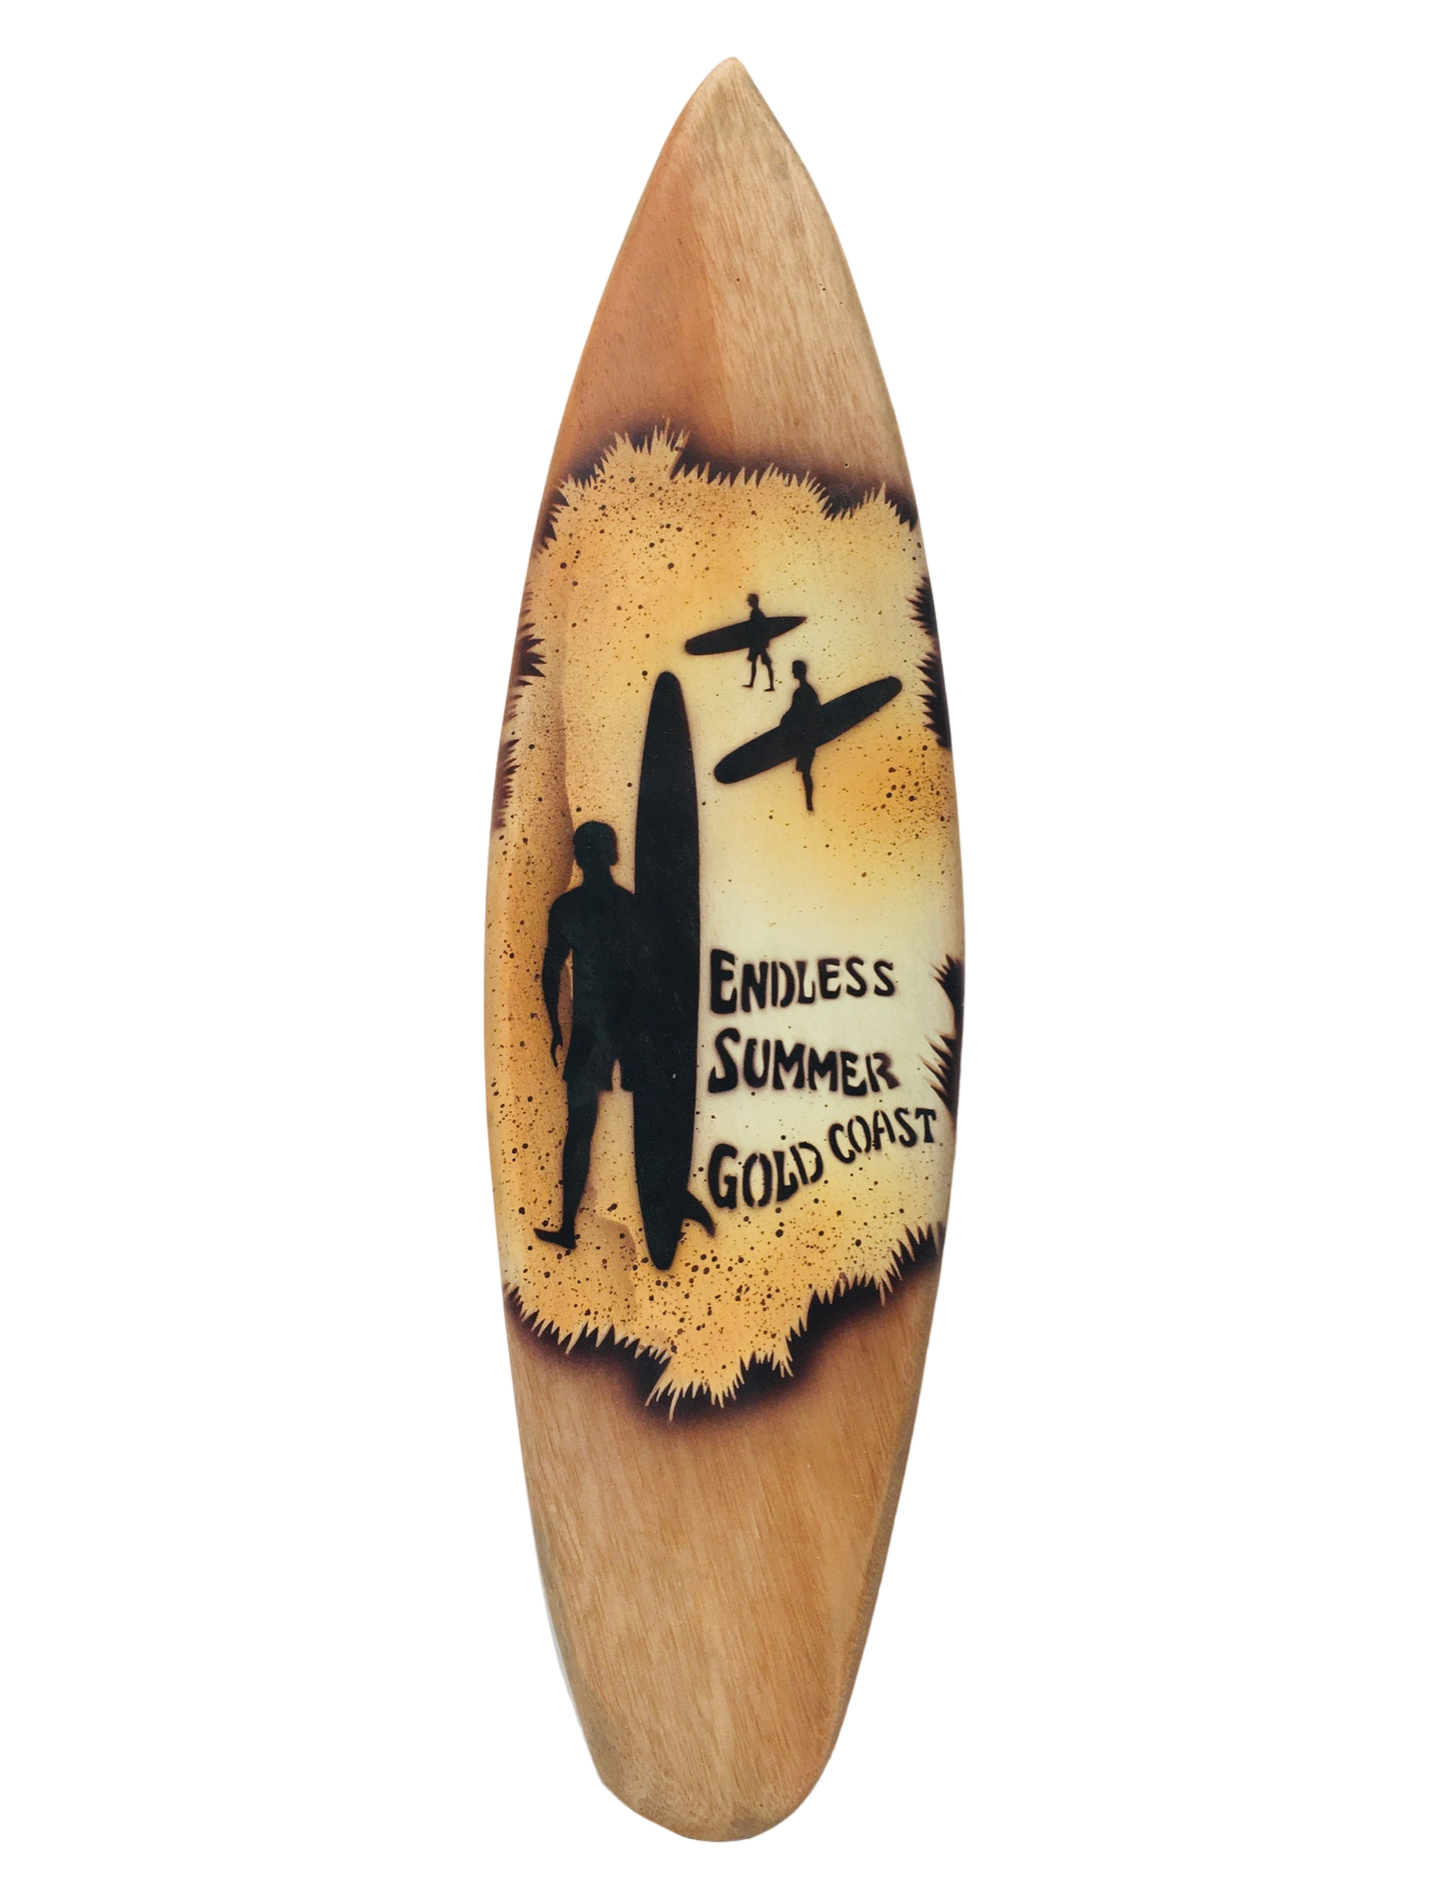 A light brown surfboard shaped piece of wood with 'Endless Summer, Gold Coast' writing. And three men carrying surboards. 